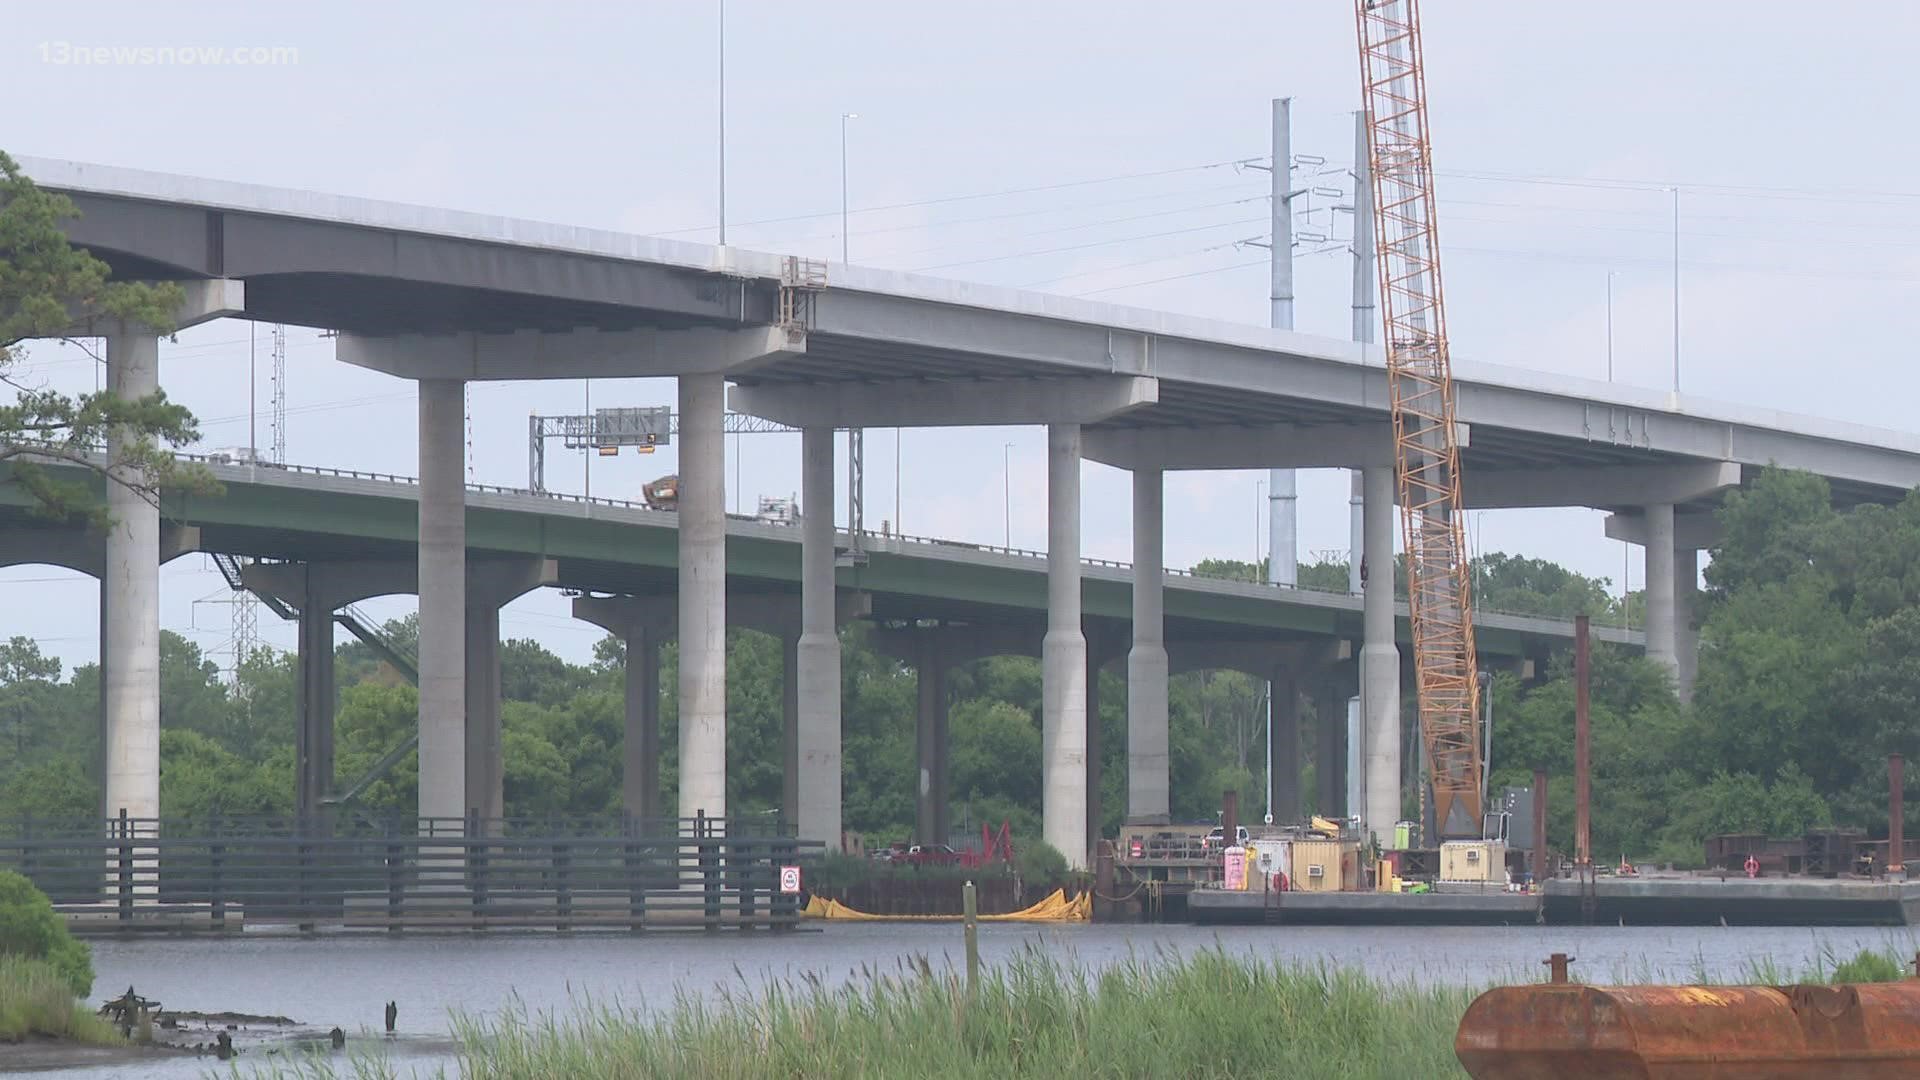 The east and westbound lanes will be on different bridges for the first time.